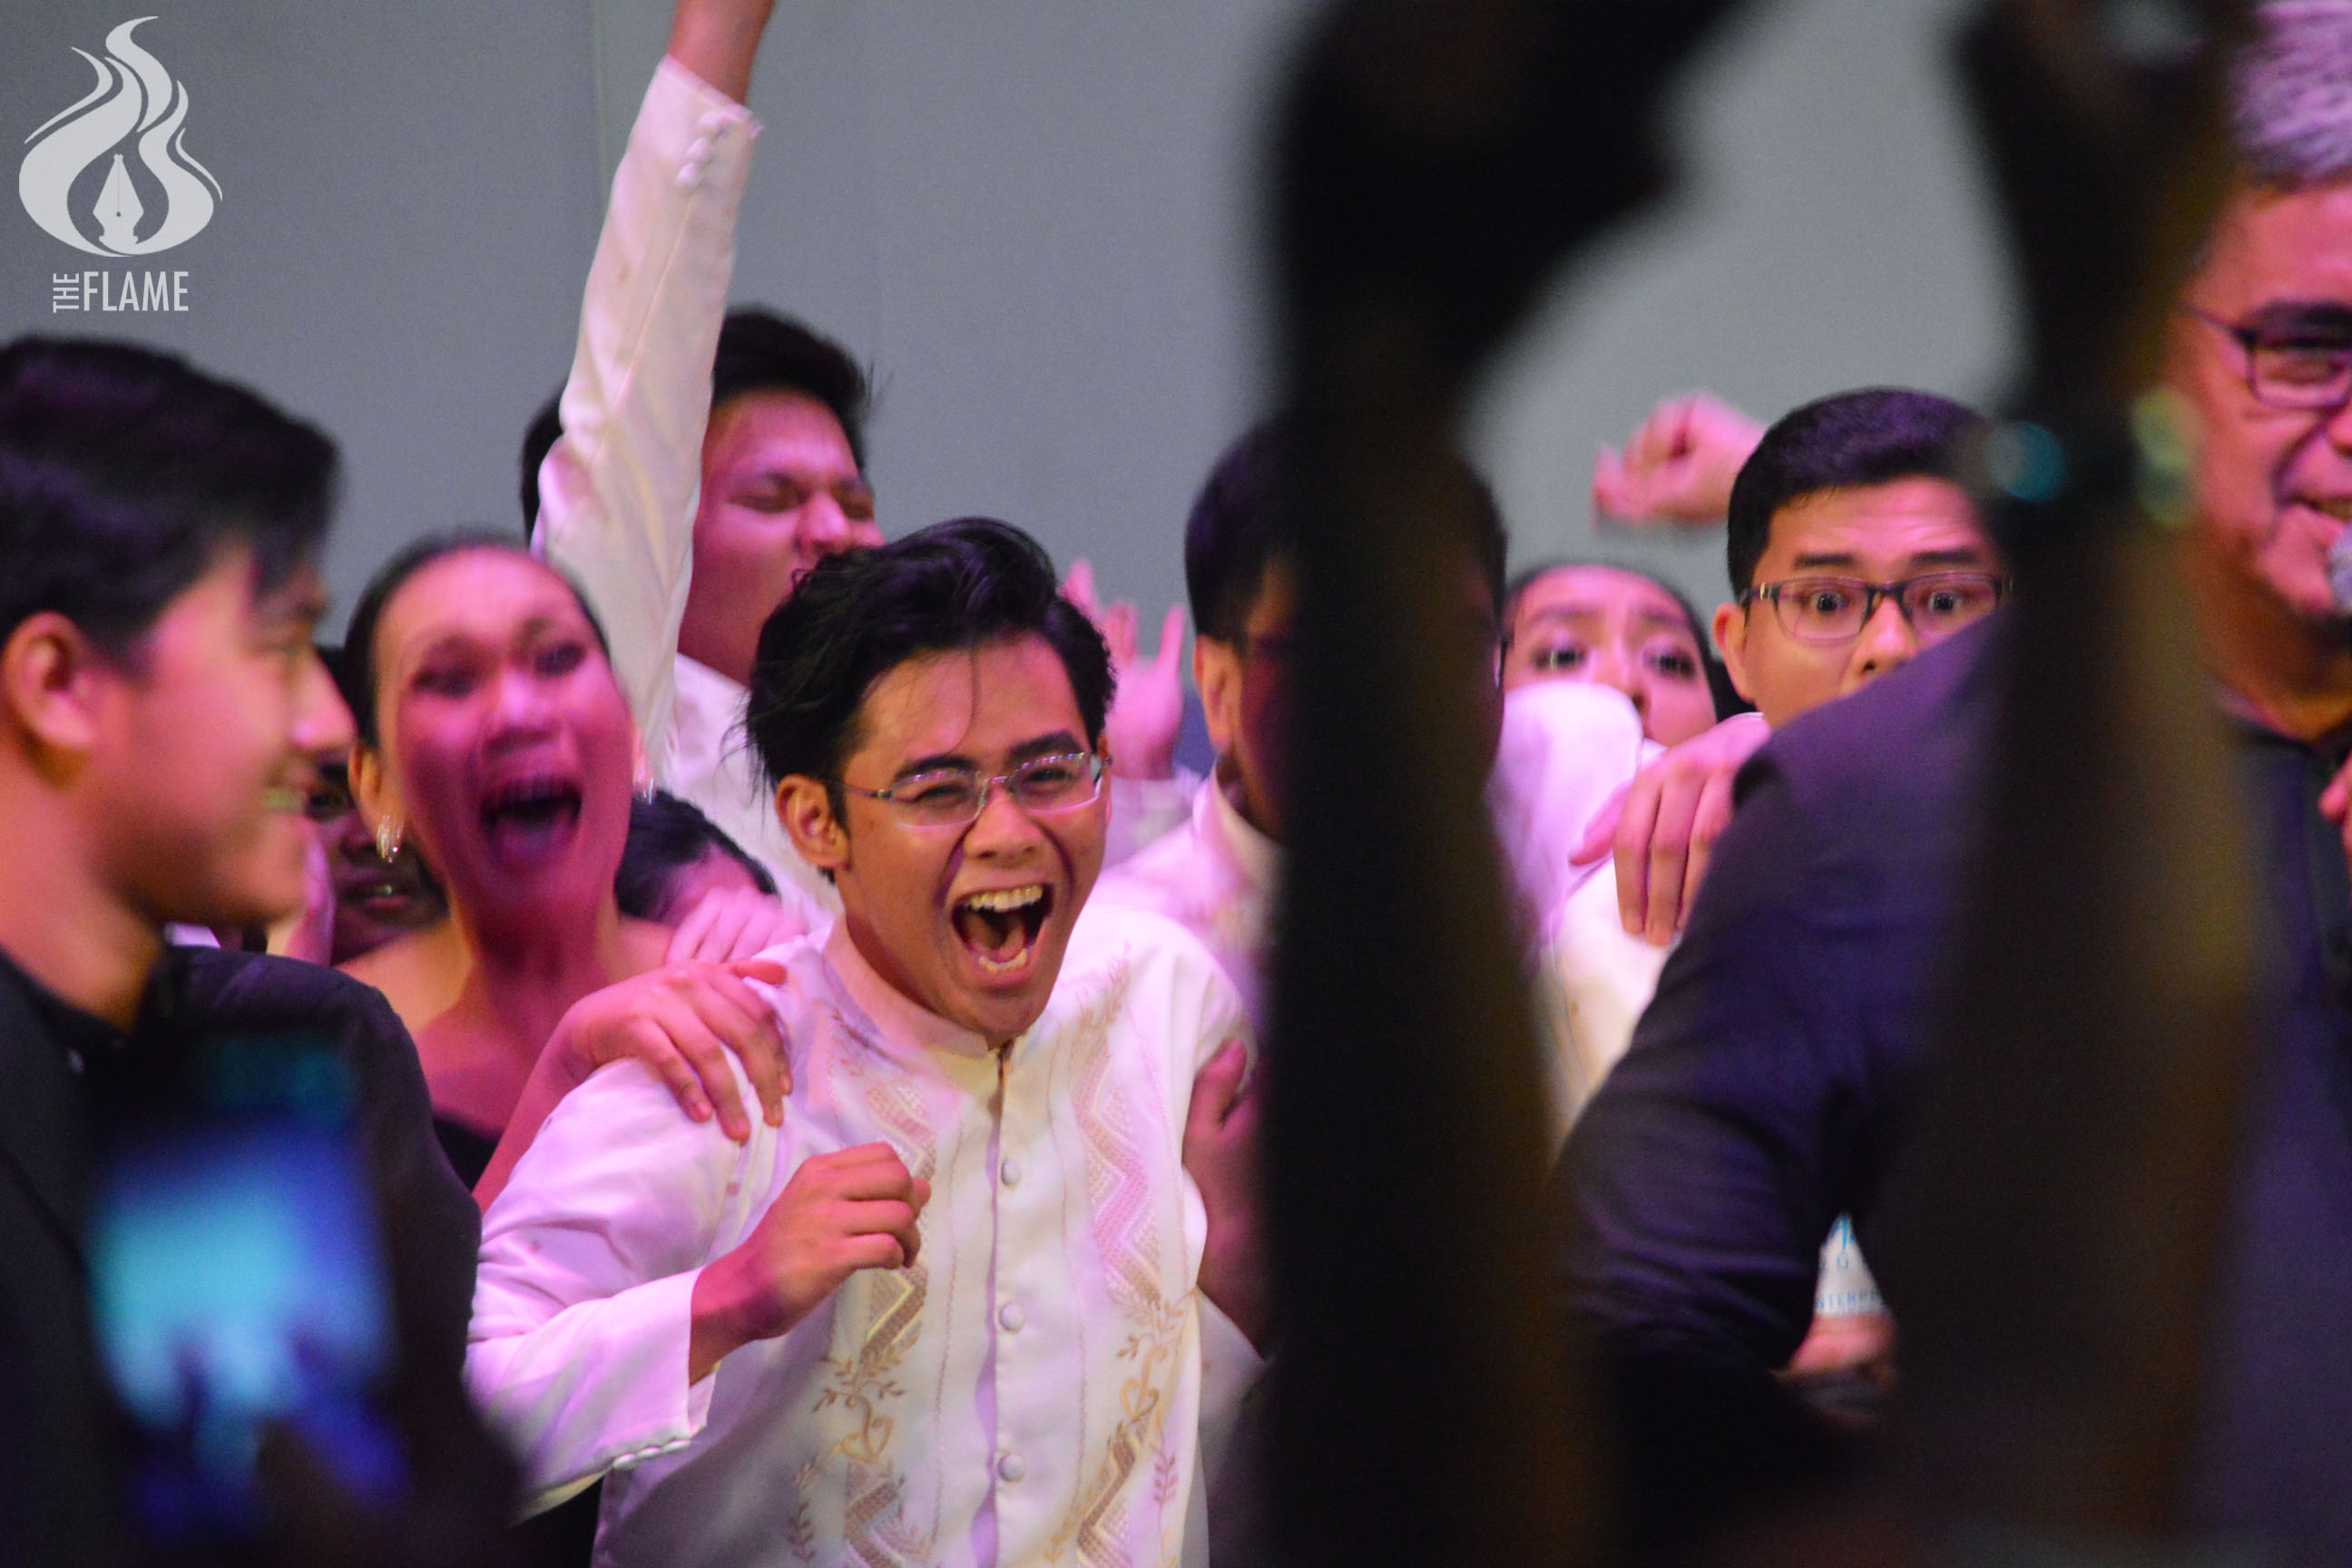 AB Chorale regains title in Himig Tomasino after 20 years